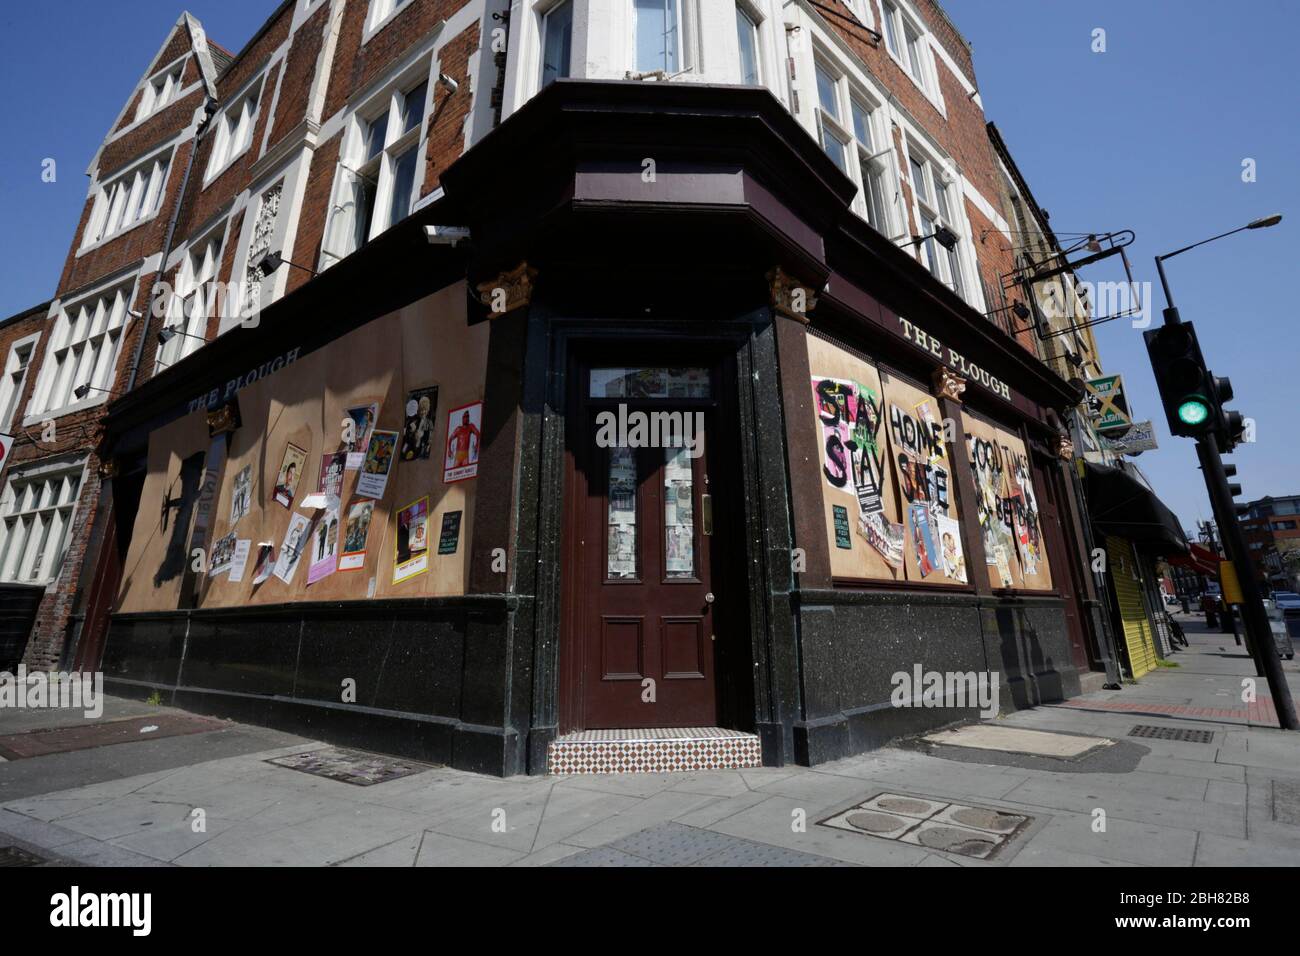 Homerton, London, UK. 24th Apr 2020. The boarded up Homerton pub in East London, calling people to stay home and safe. Due to the Covid-19 outbreak. Credit: Marcin Nowak/Alamy Live News Stock Photo